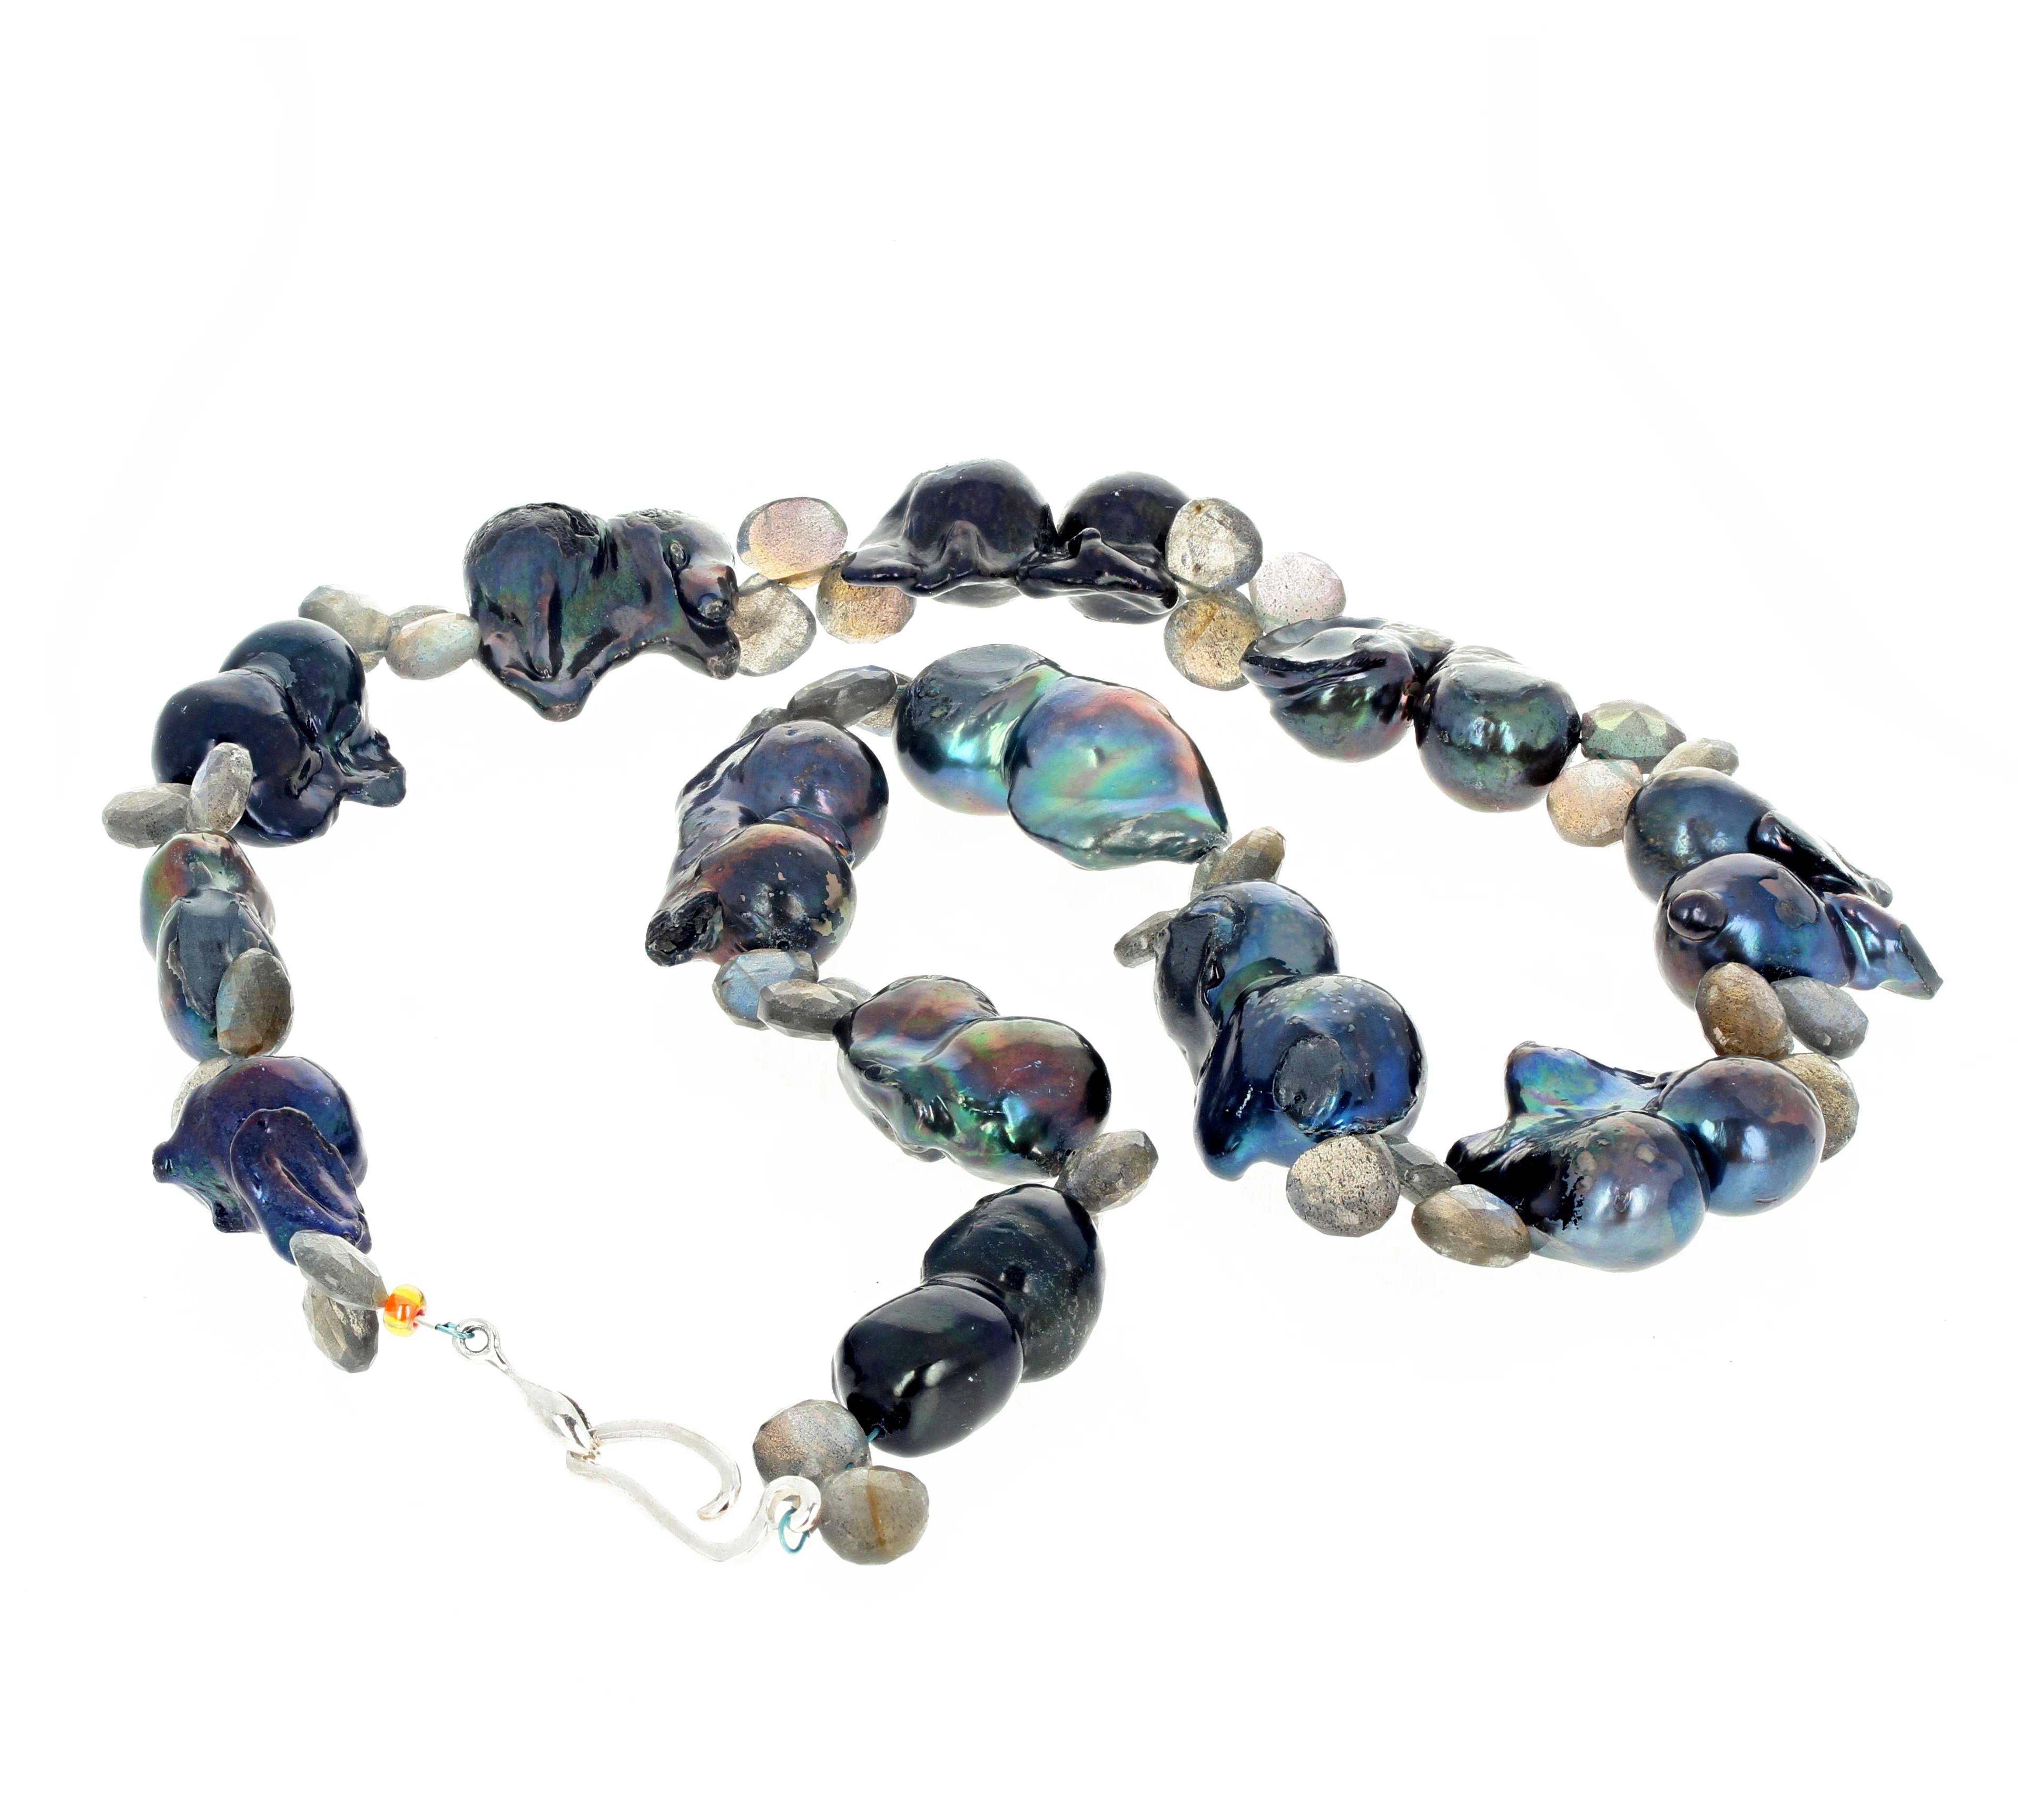 Women's Peacock Pearls and Labradorite Necklace